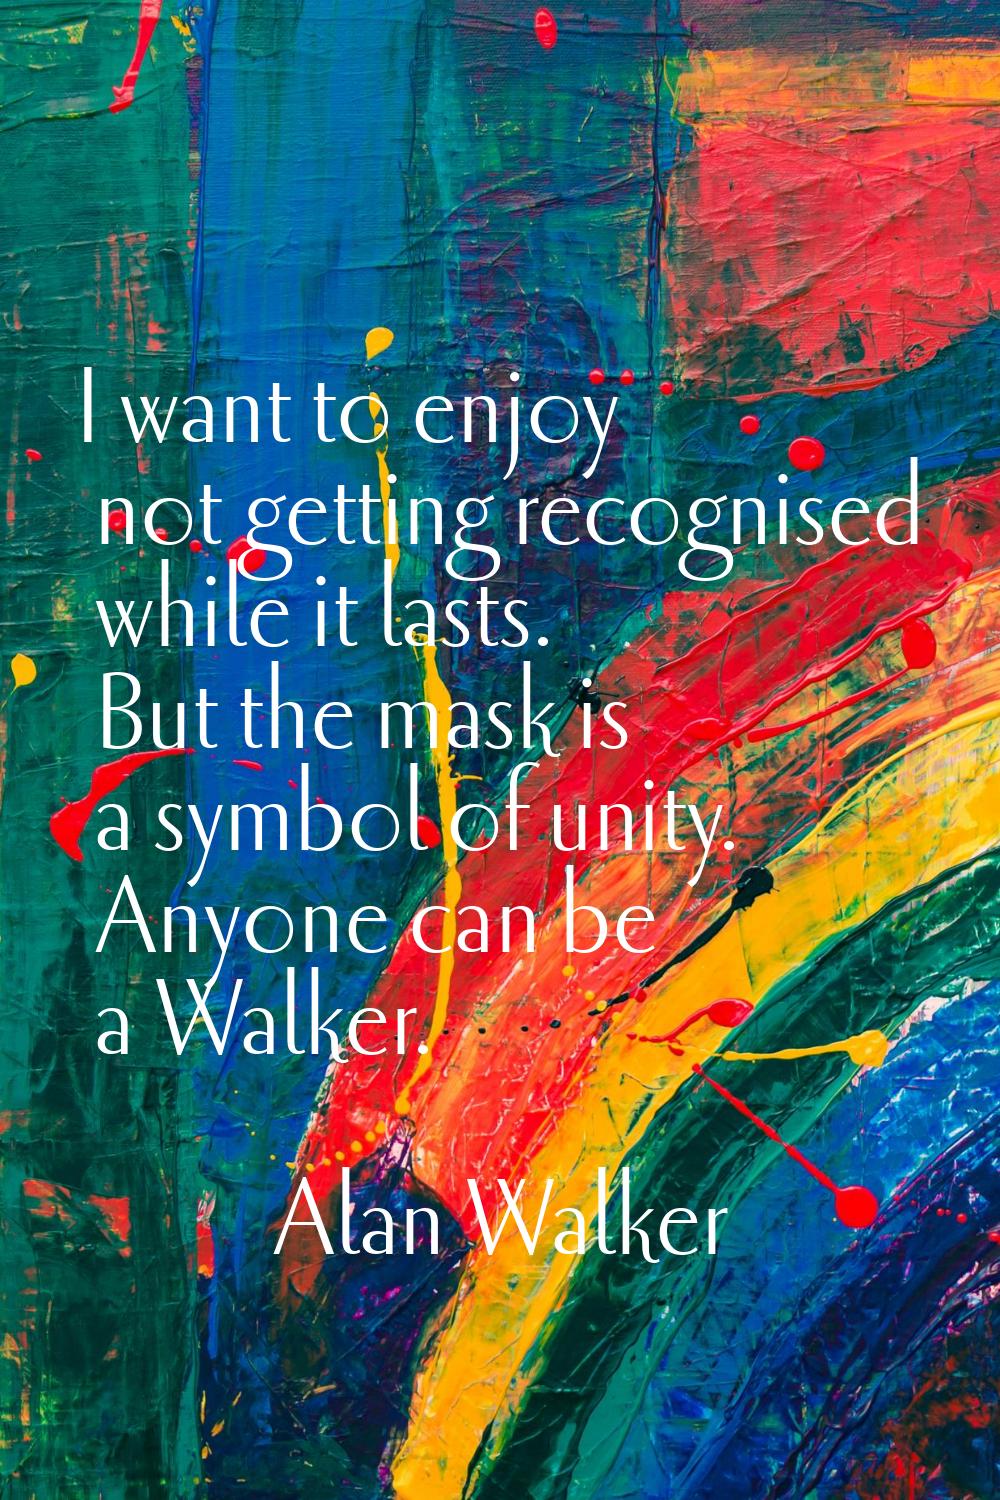 I want to enjoy not getting recognised while it lasts. But the mask is a symbol of unity. Anyone ca